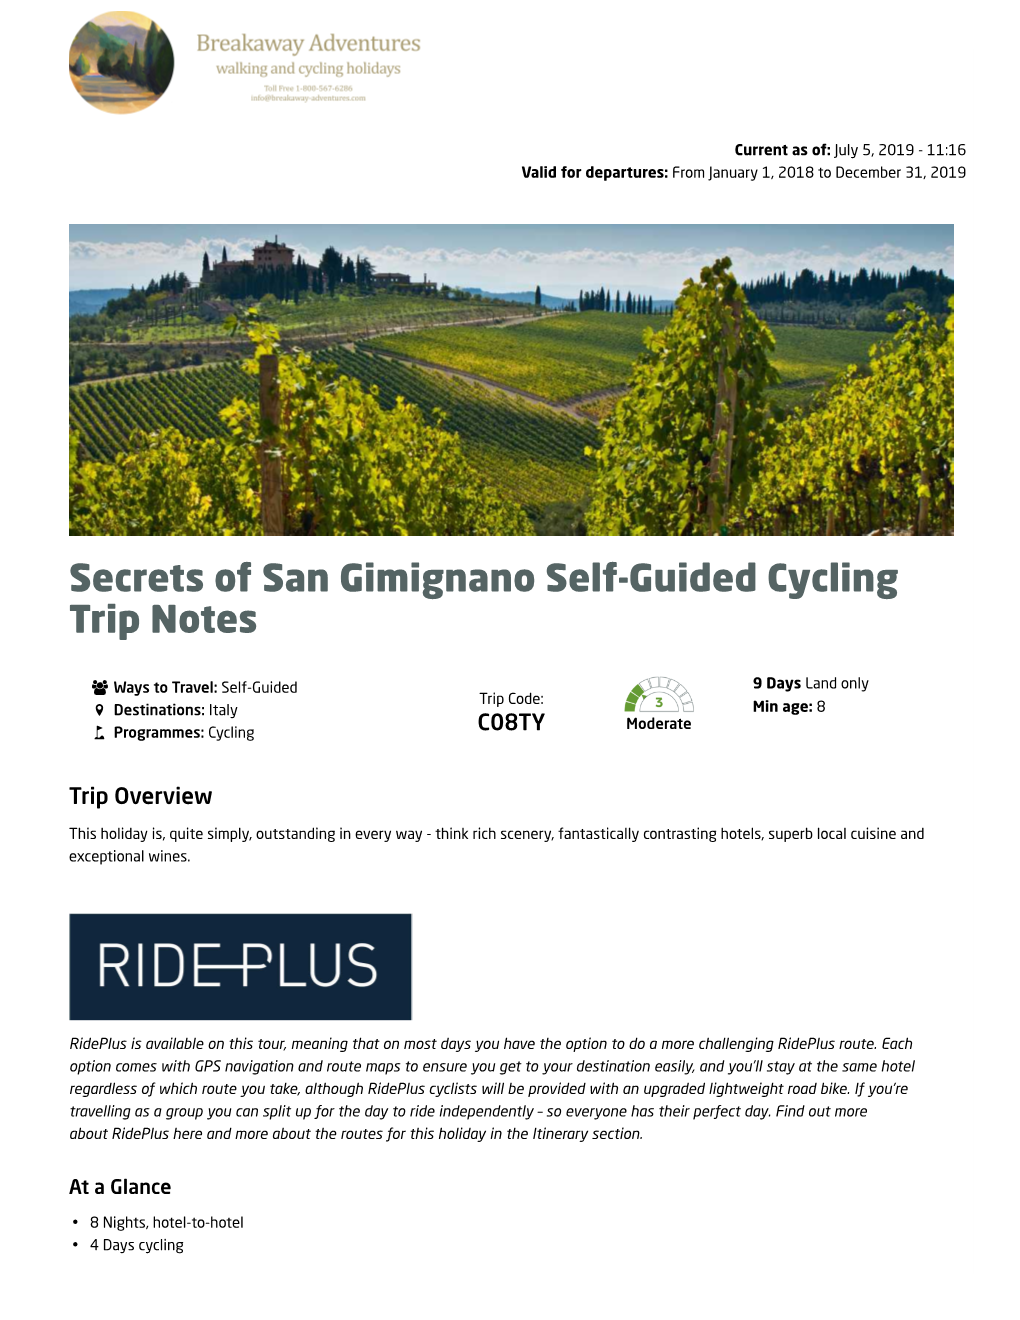 Secrets of San Gimignano Self-Guided Cycling Trip Notes